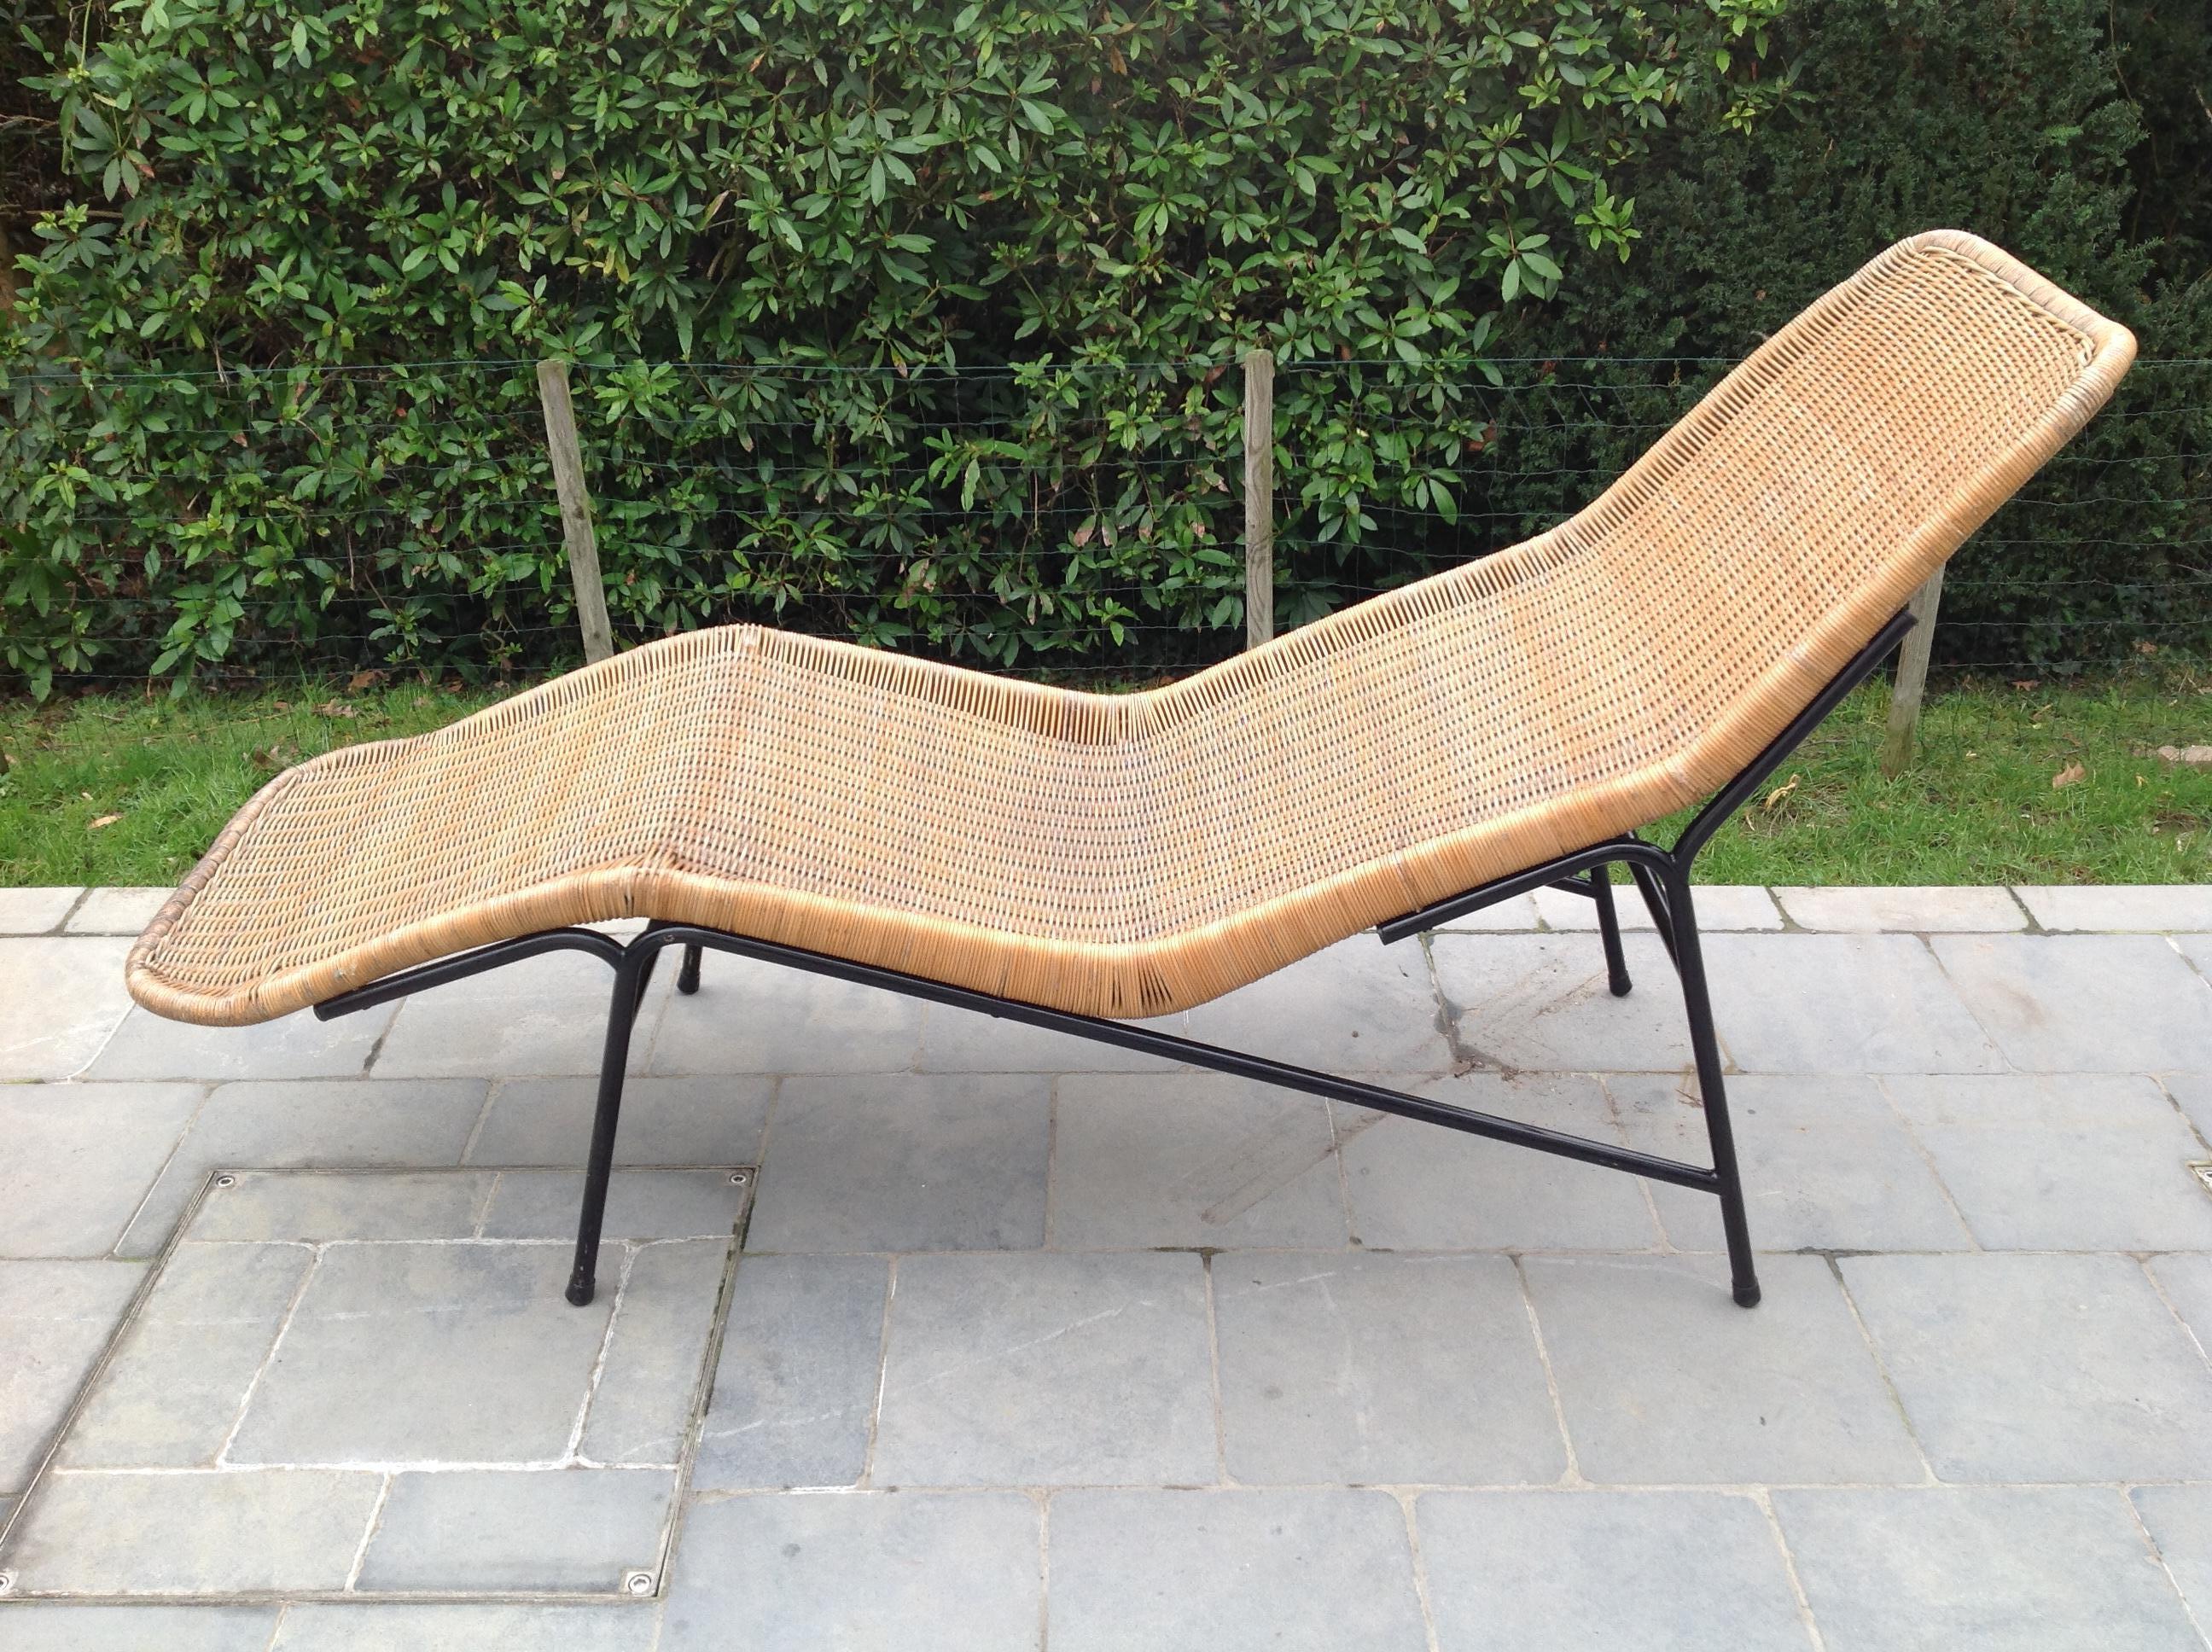 This very rare lounge chair are example of the very nice quality.
The combination of the painted steel frame with a webbing of cane (wicker) pattern makes a beautiful modernist chaise longue.